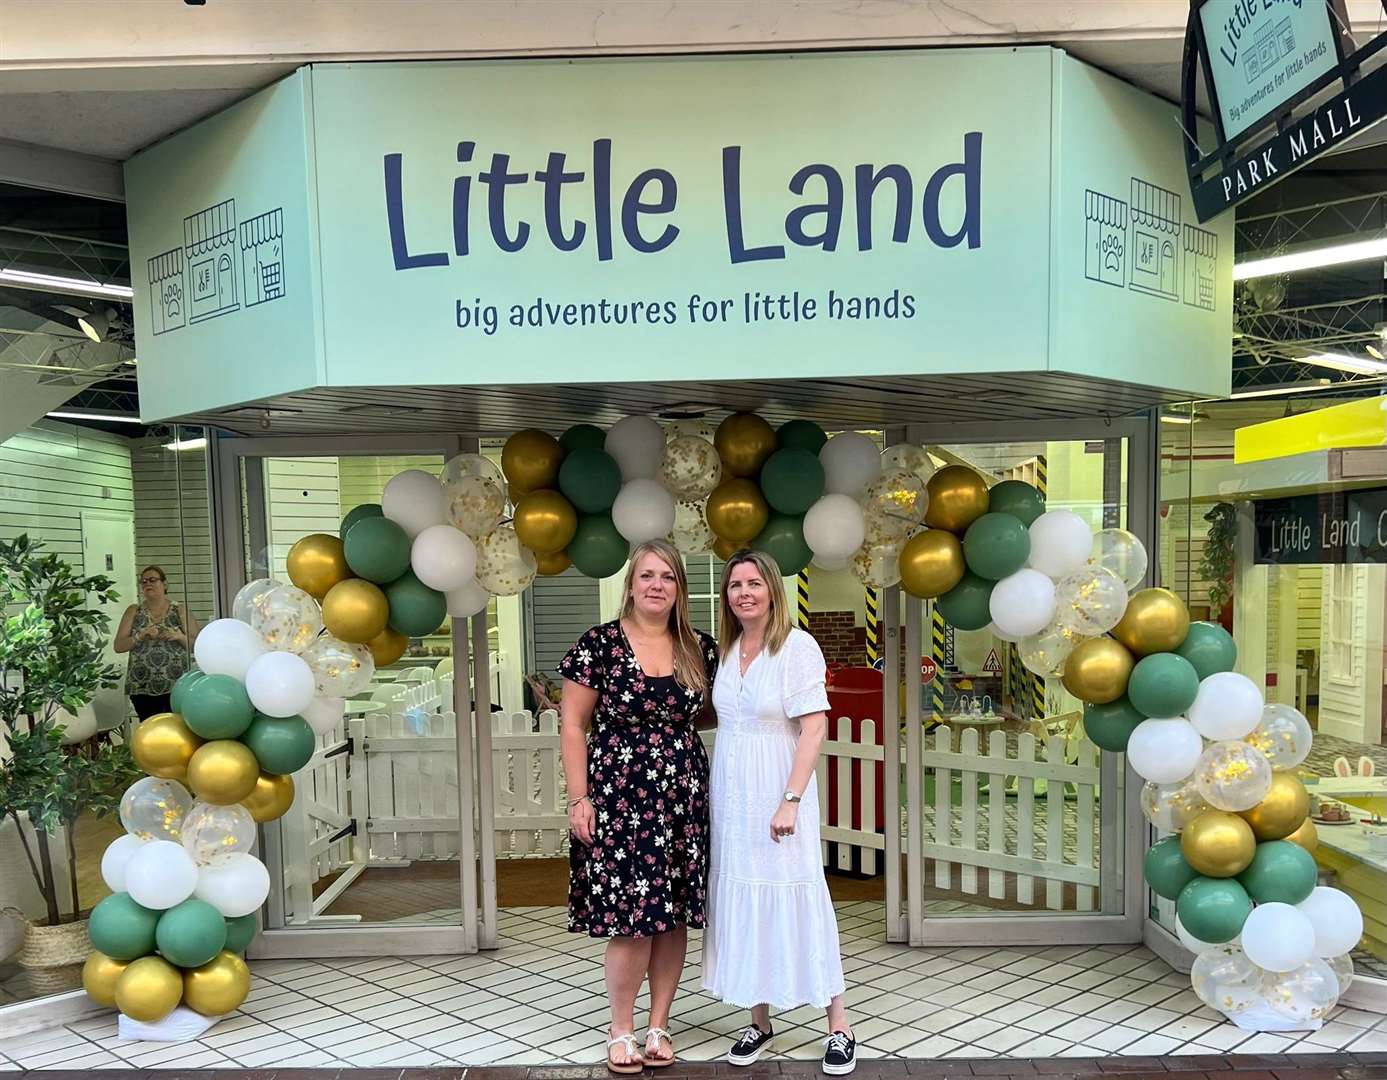 Owners of Little Land in Ashford, Susie Winchester and Natasha Miller